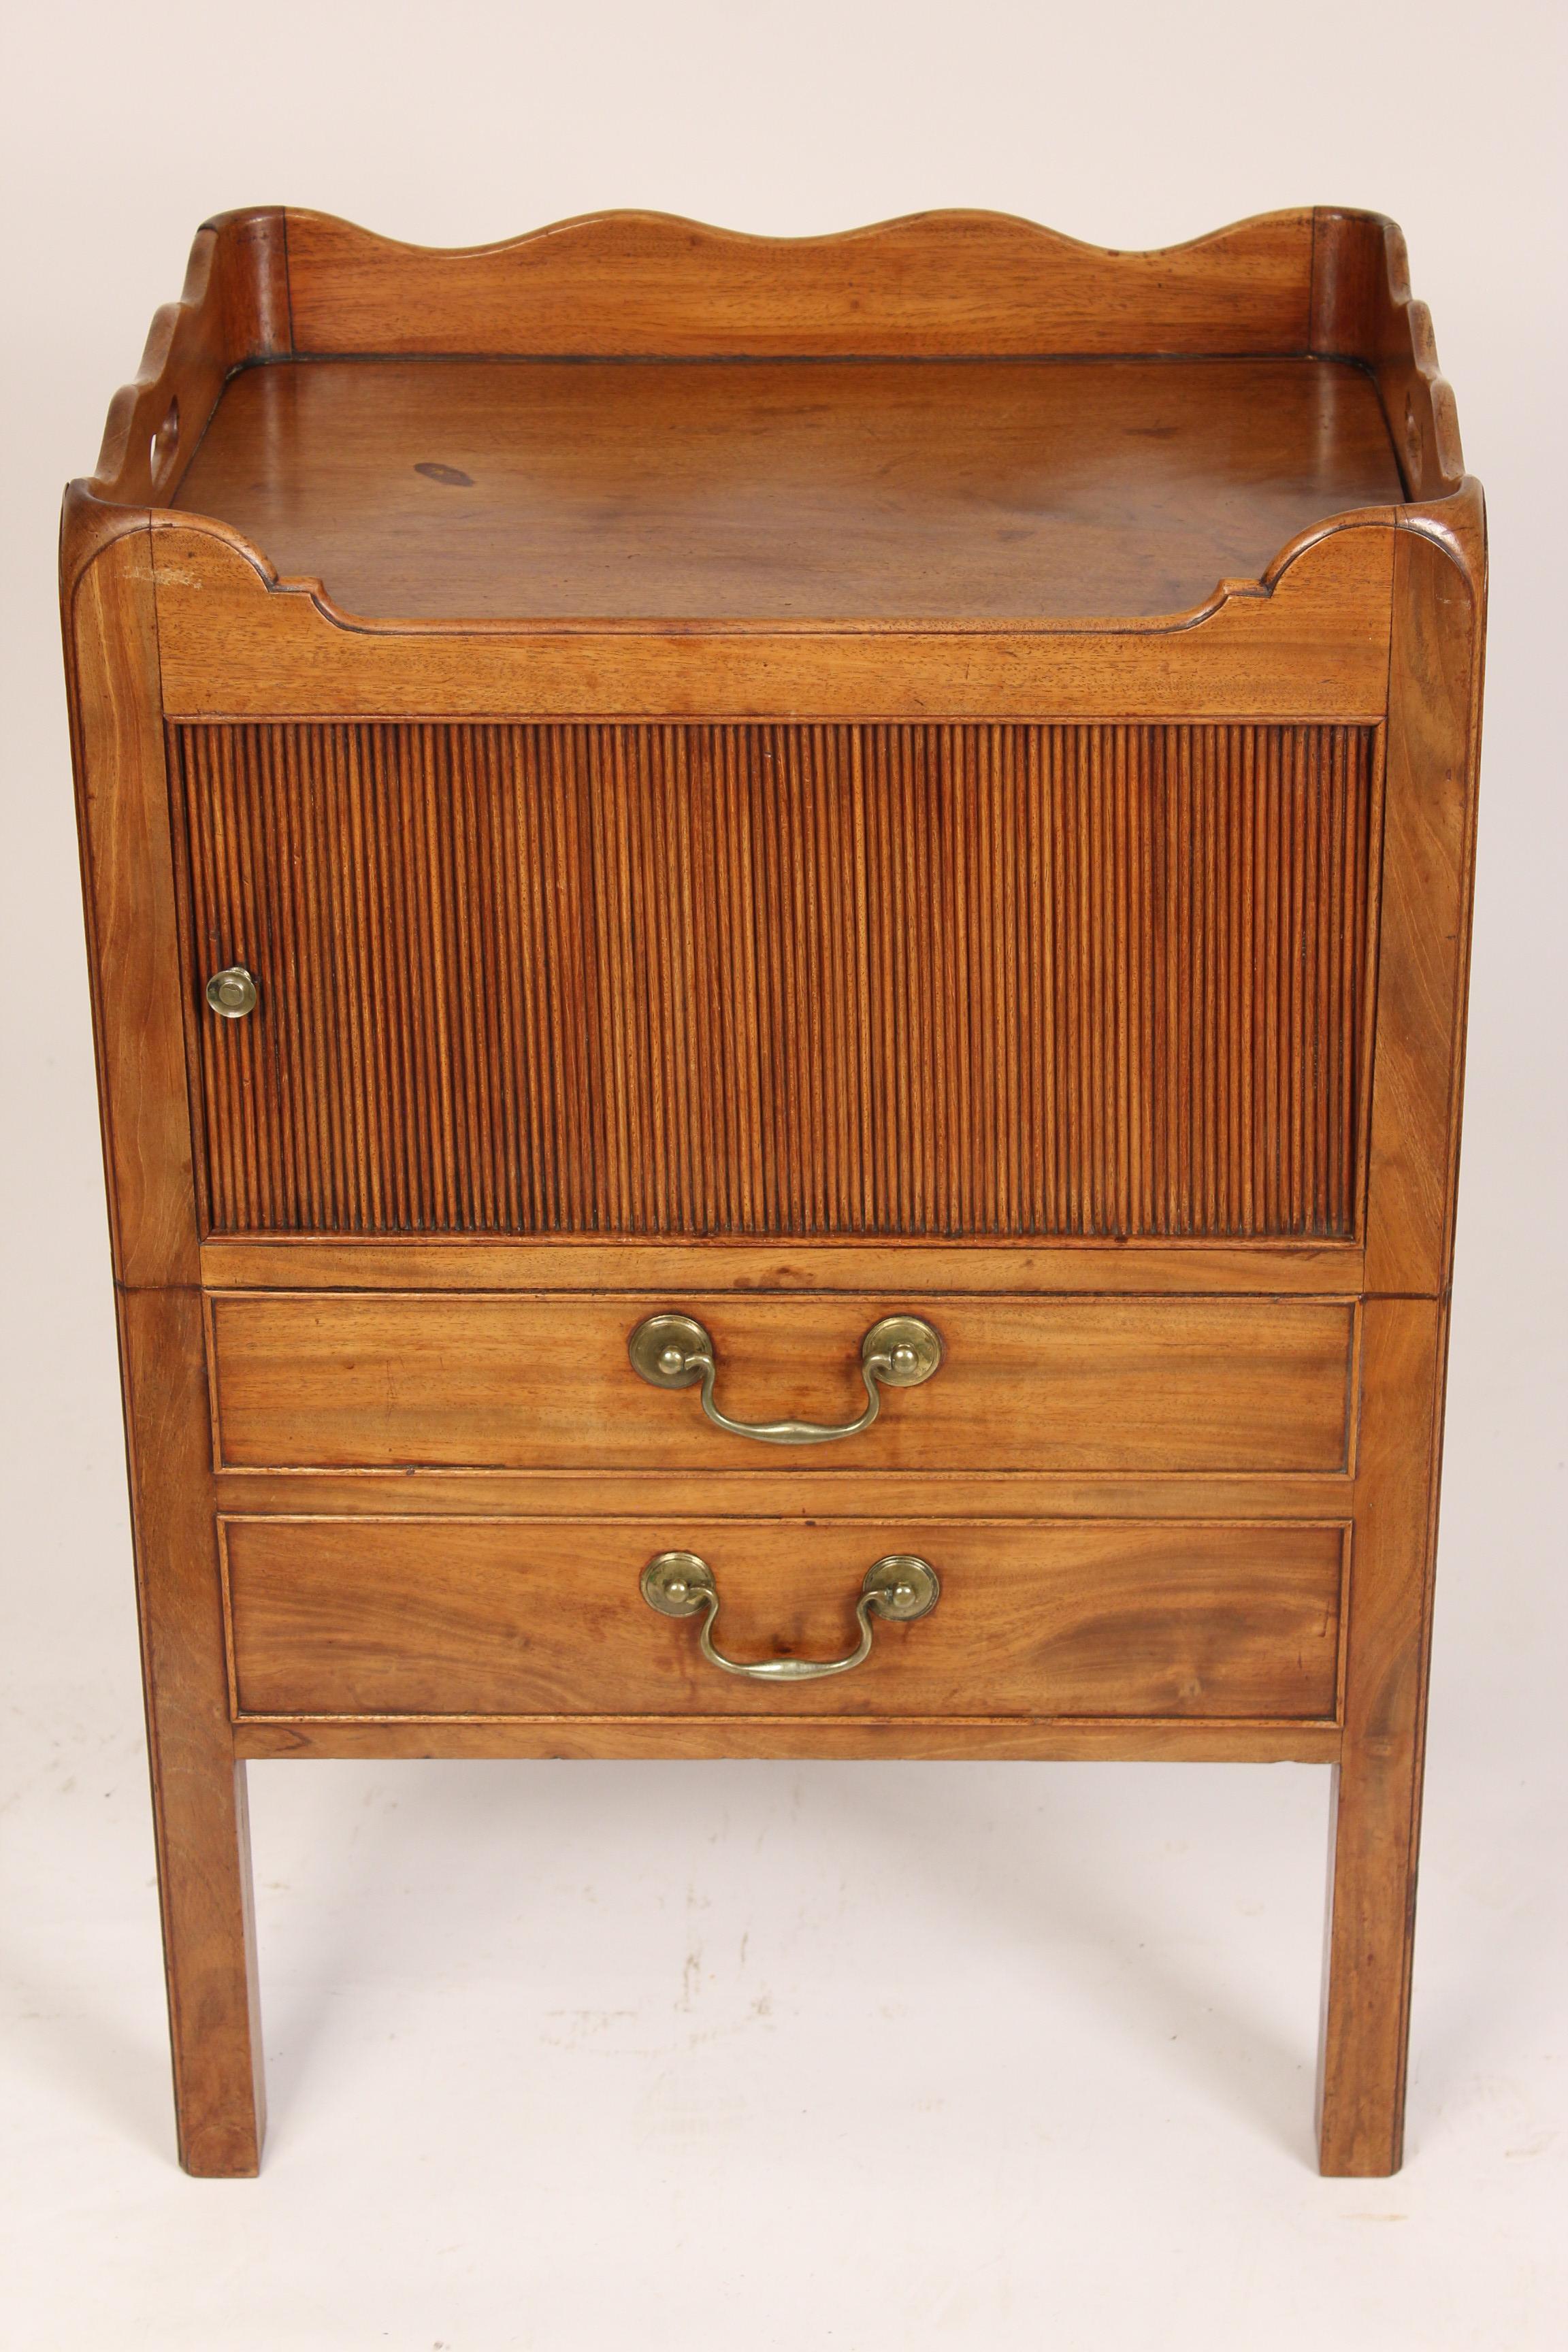 George III mahogany bedside commode with a tambour door, circa 1800. Measure: Overall height 30.25